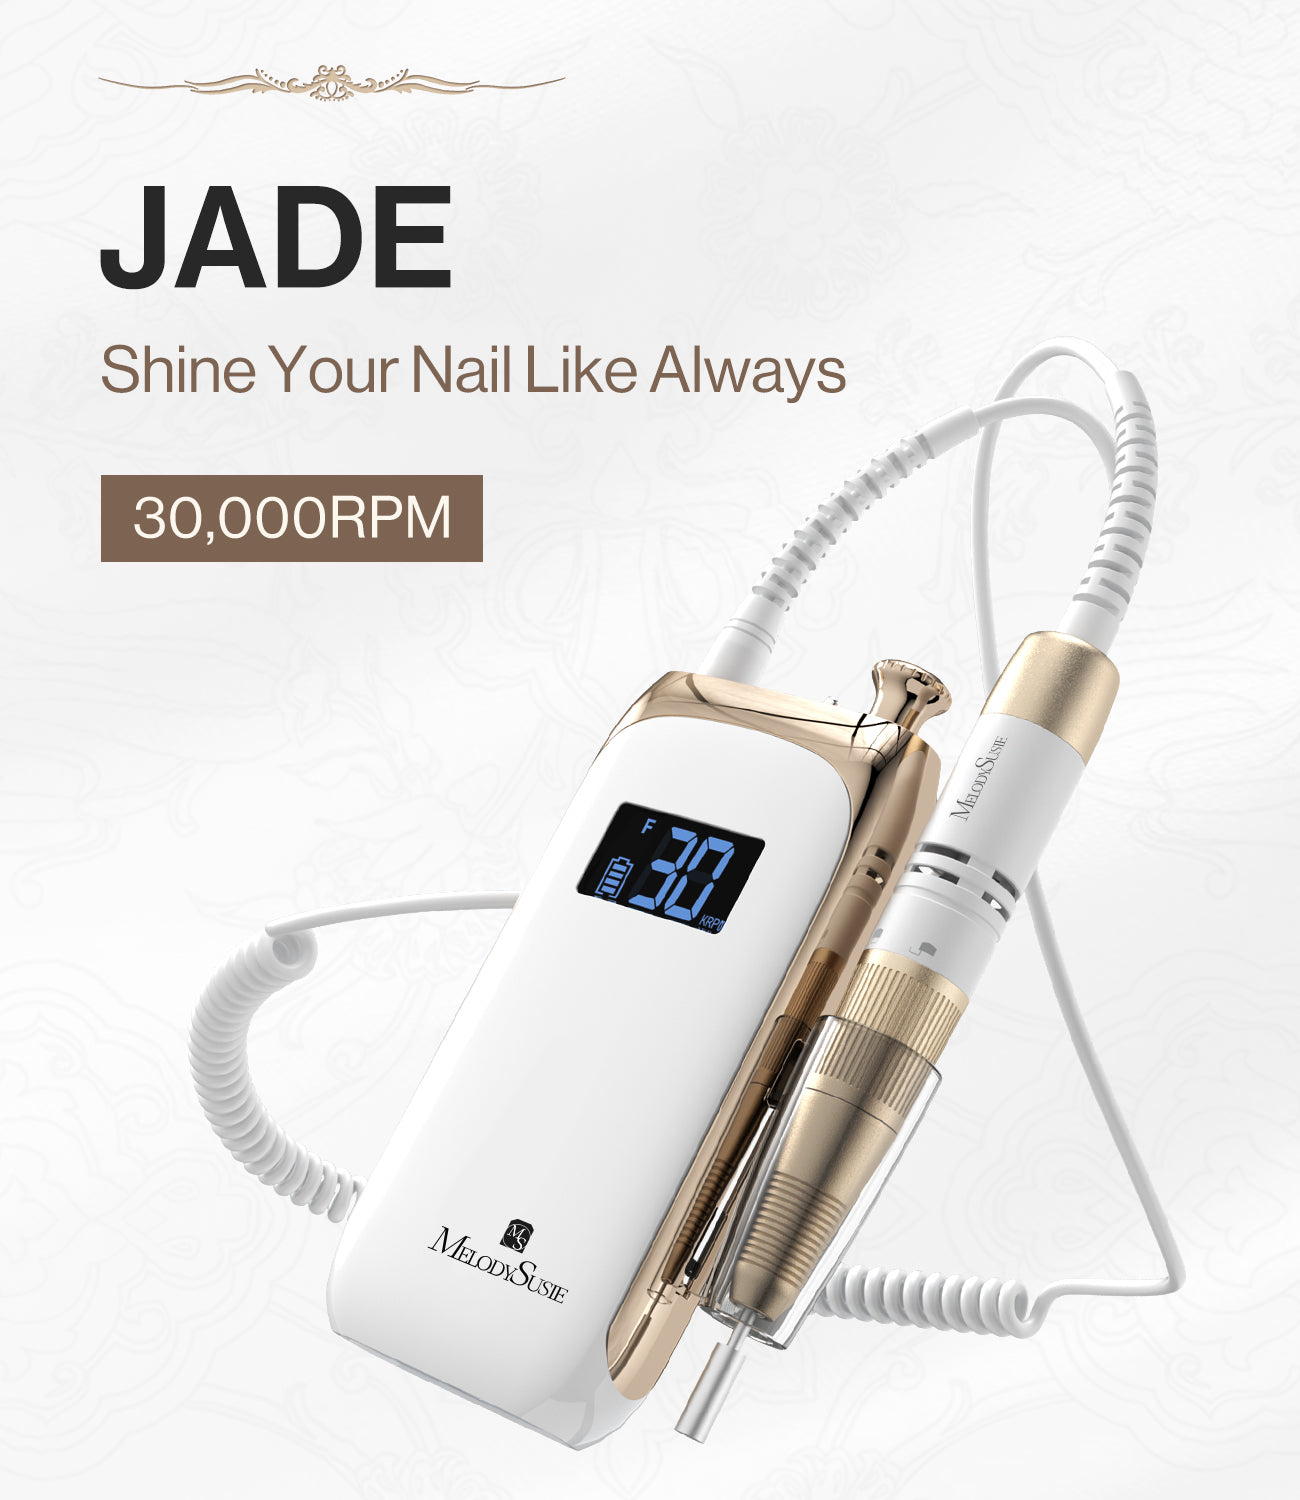 SR3-Jade Rechargeable Nail Drill 30,000RPM